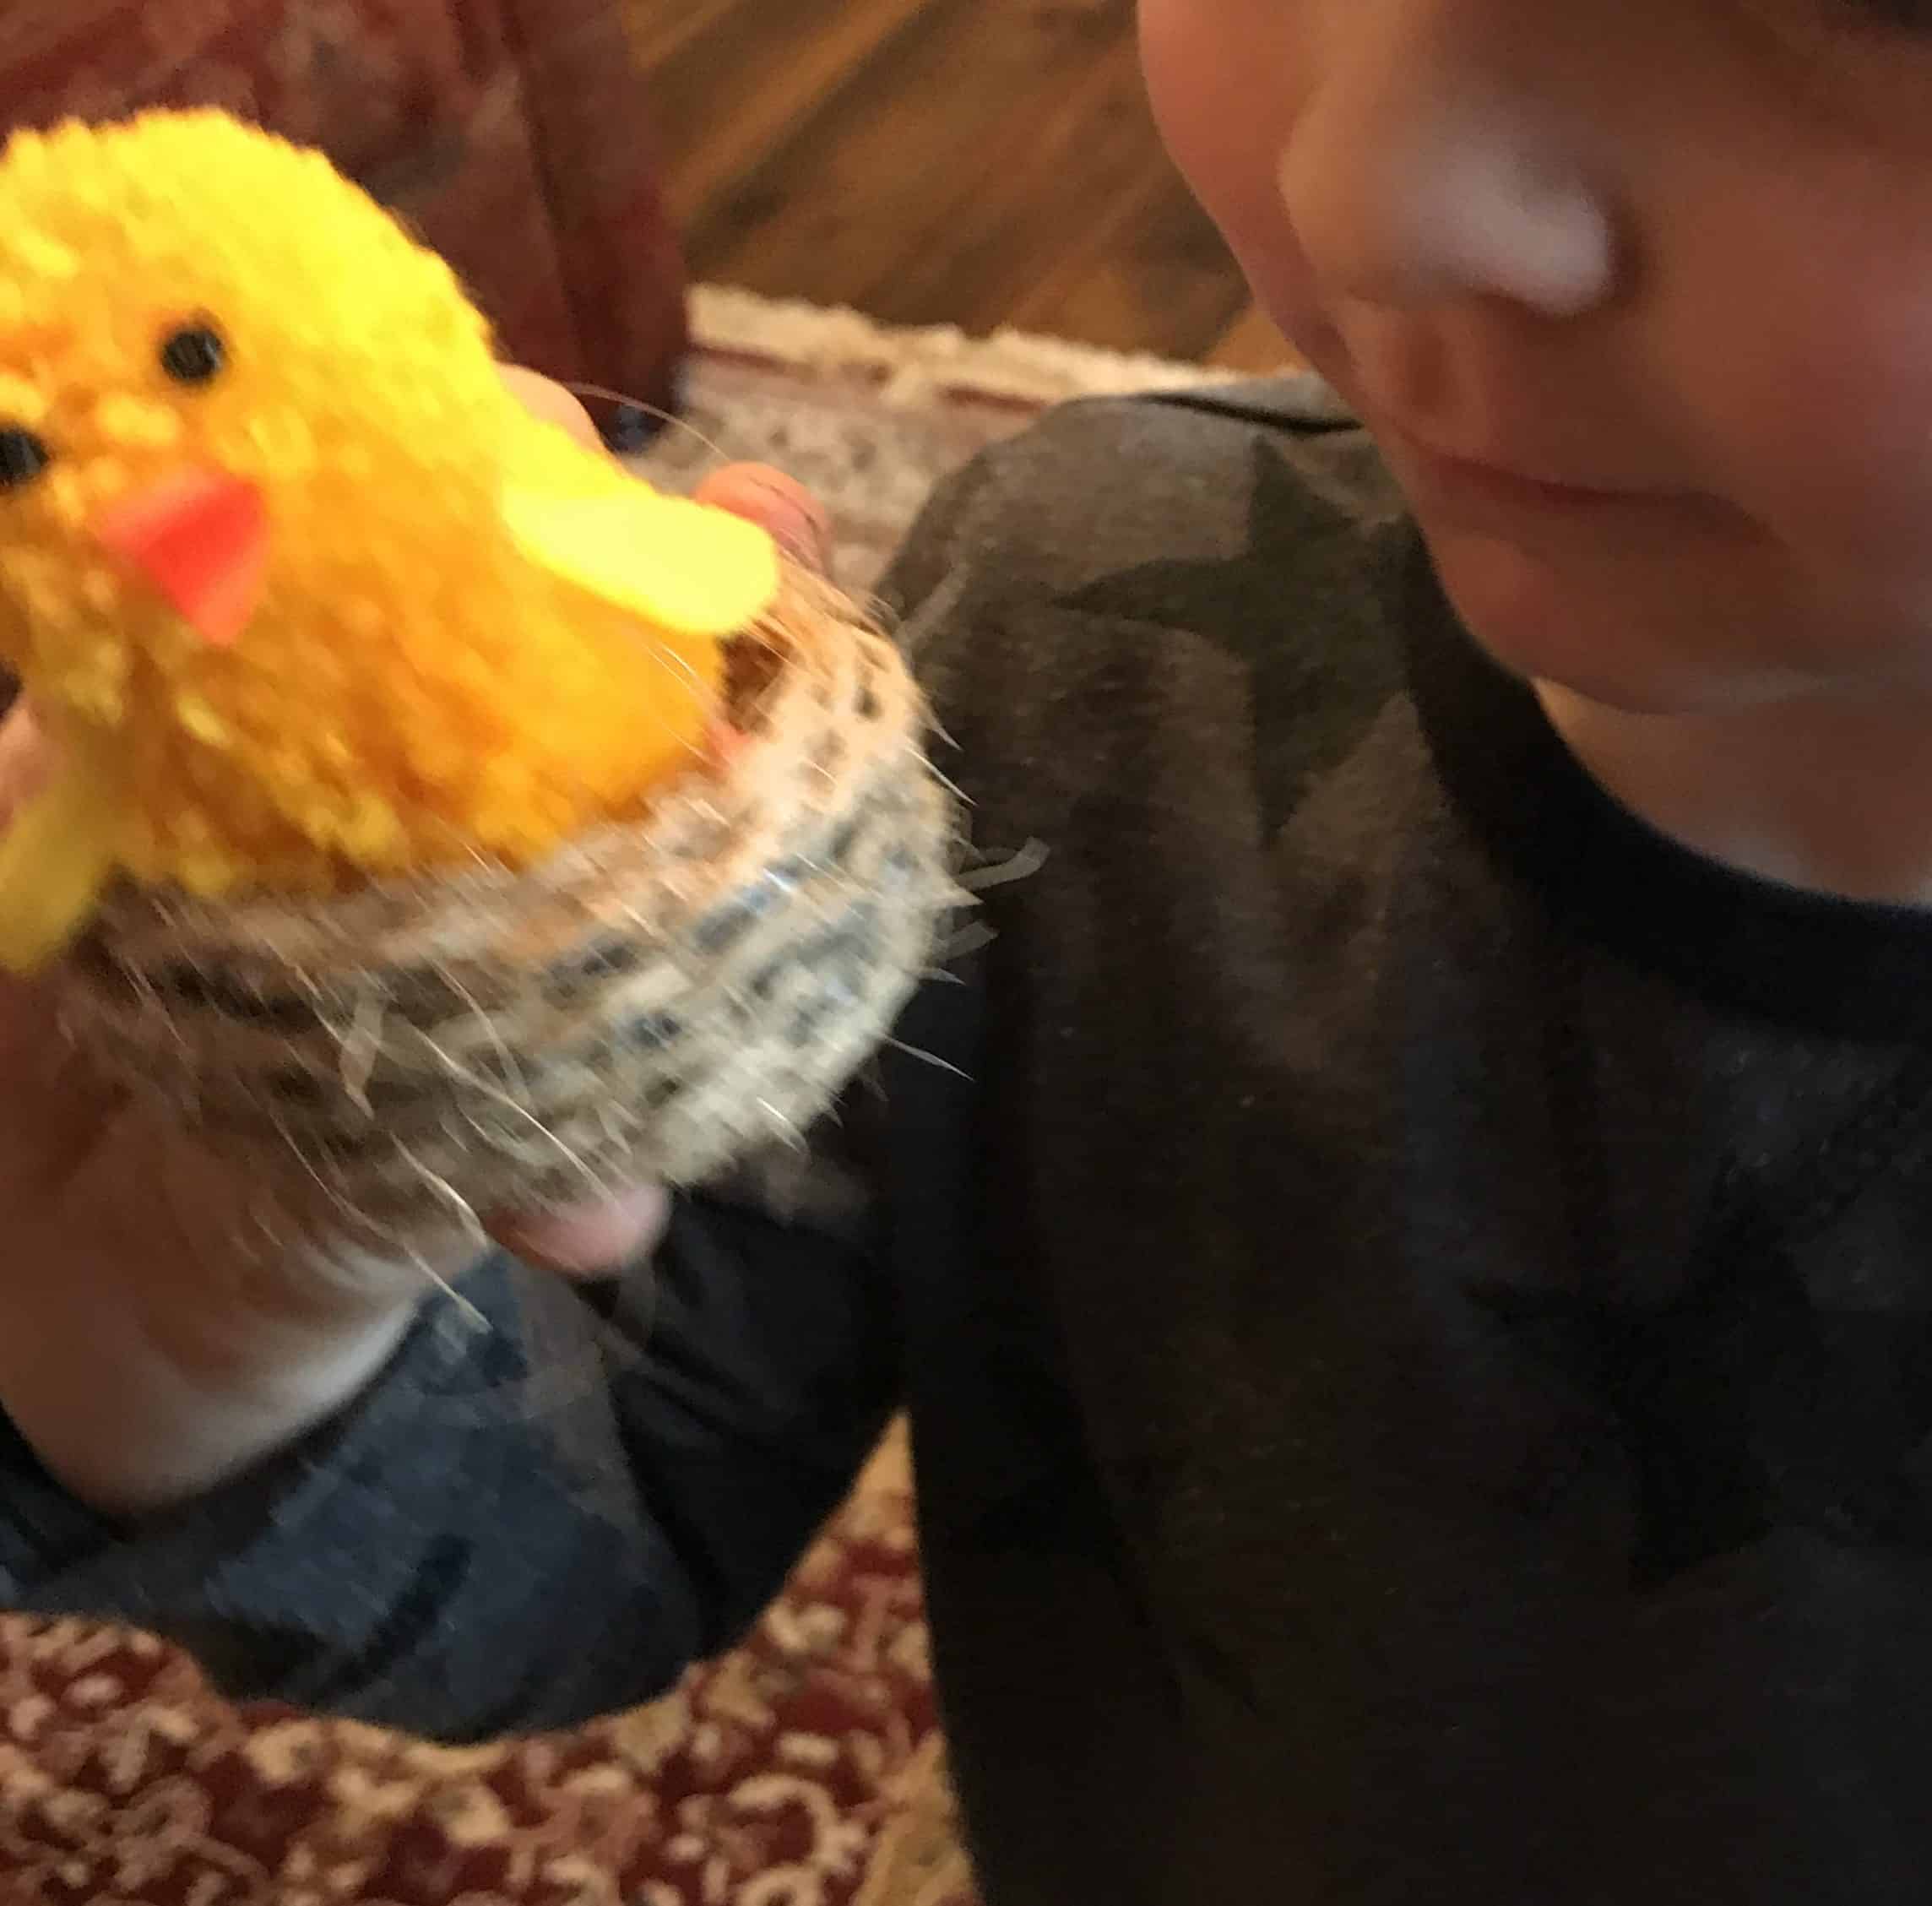 Kids Easter Craft | Quick & Easy Easter Chick You Can Make In Less Than 30 Minutes | Easy Easter Craft | Easter Activities | Pom Pom Craft | Crafts To Make and Sell | Via: https://themummyfront.com #themummyfront.com #easterchick #eastercraft #eastercraftsforkids #easteractivities #easycrafts #craftstosell #easter